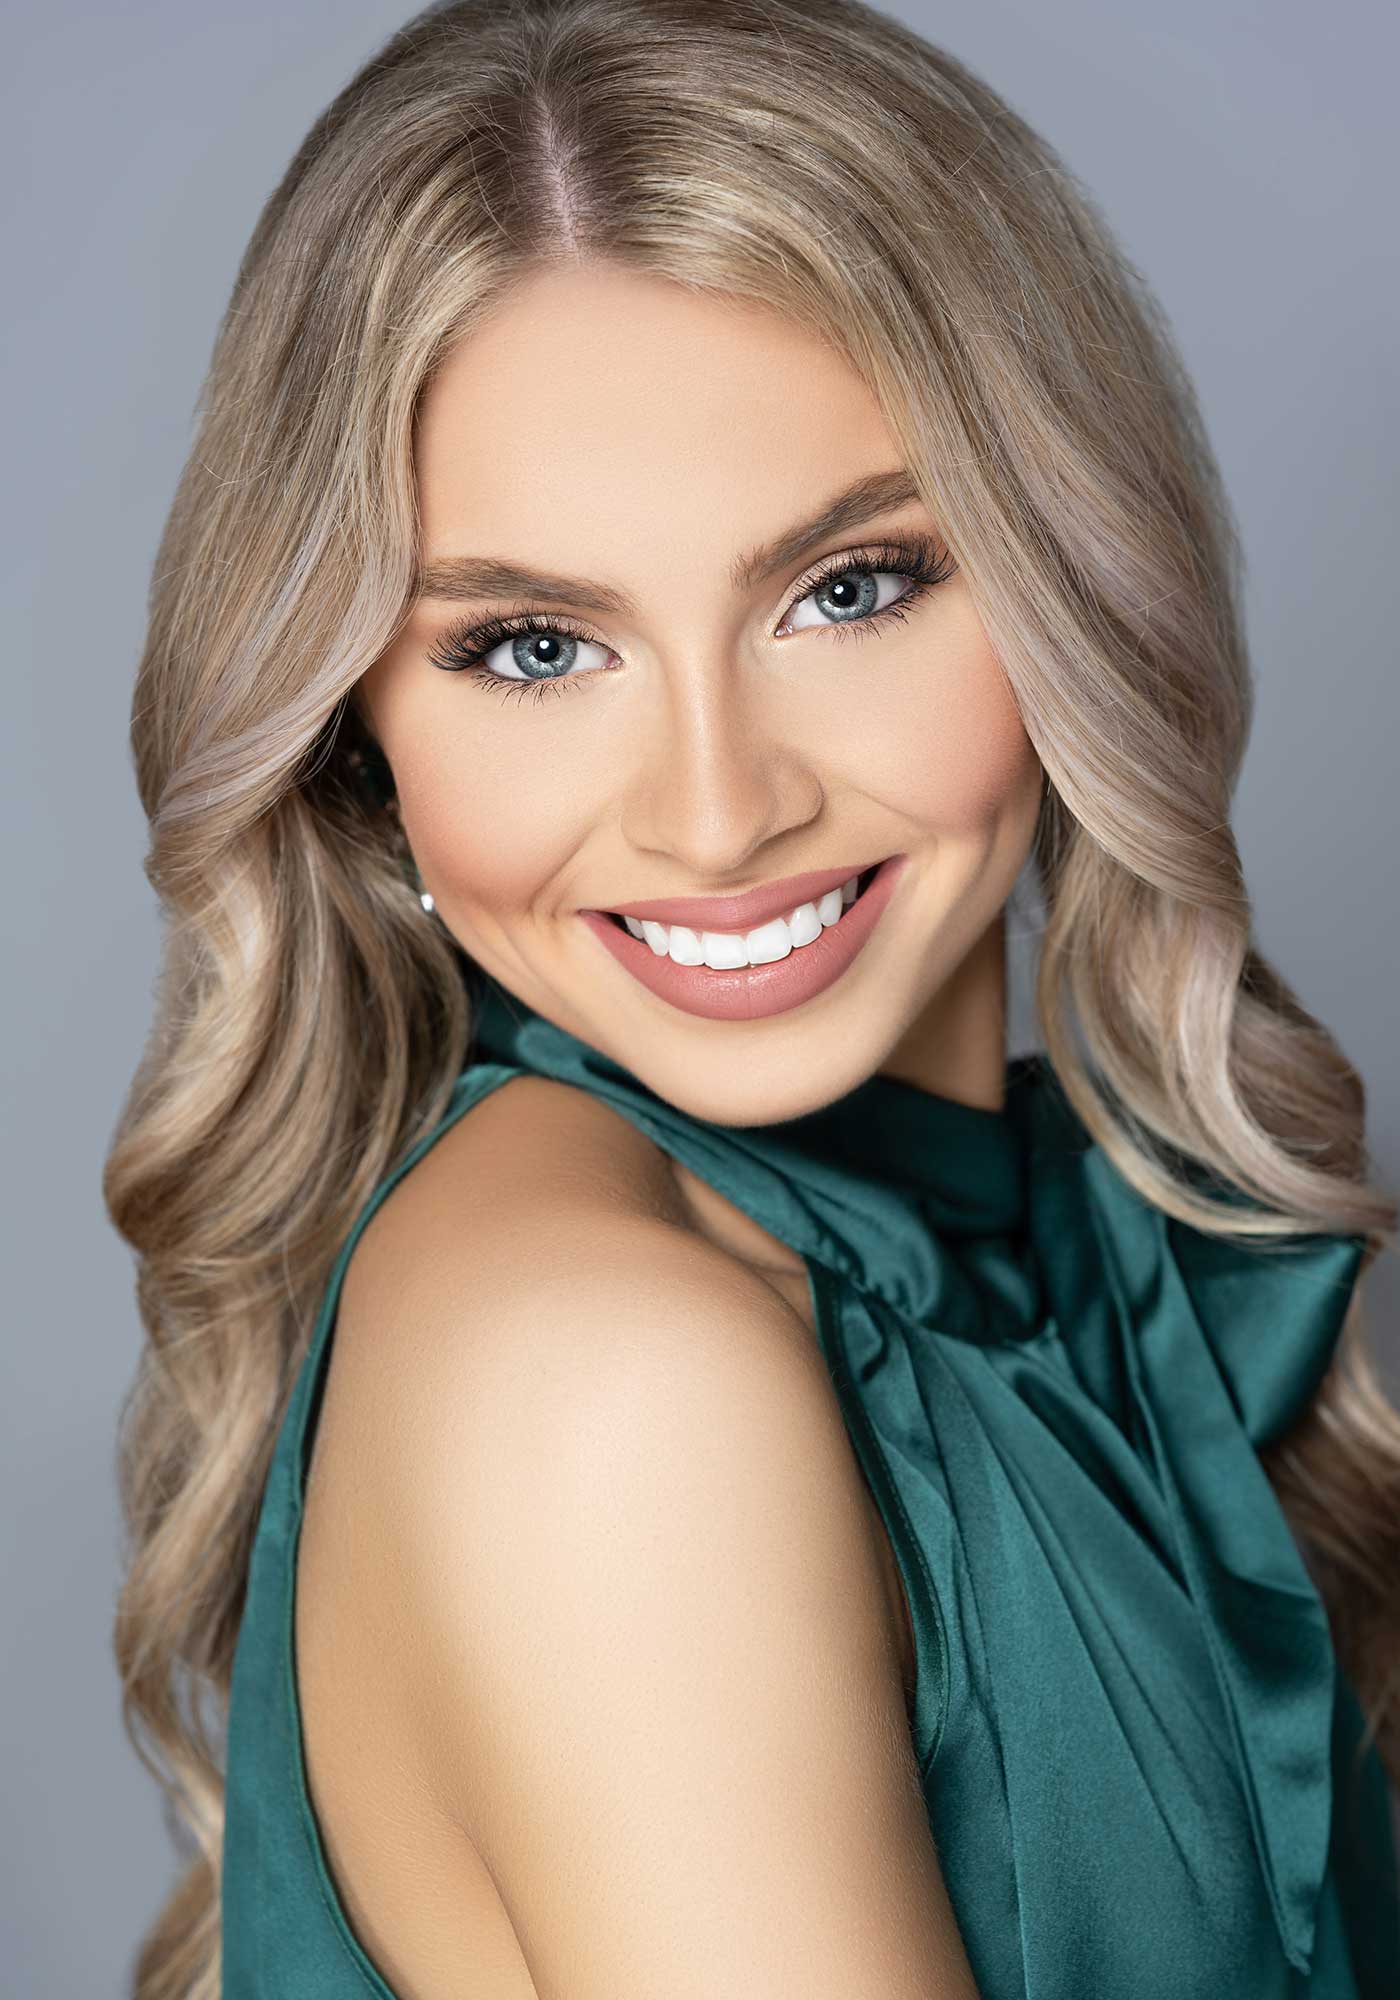 KT Scannell crowned Miss Louisiana USA 2022 for Miss USA 2022